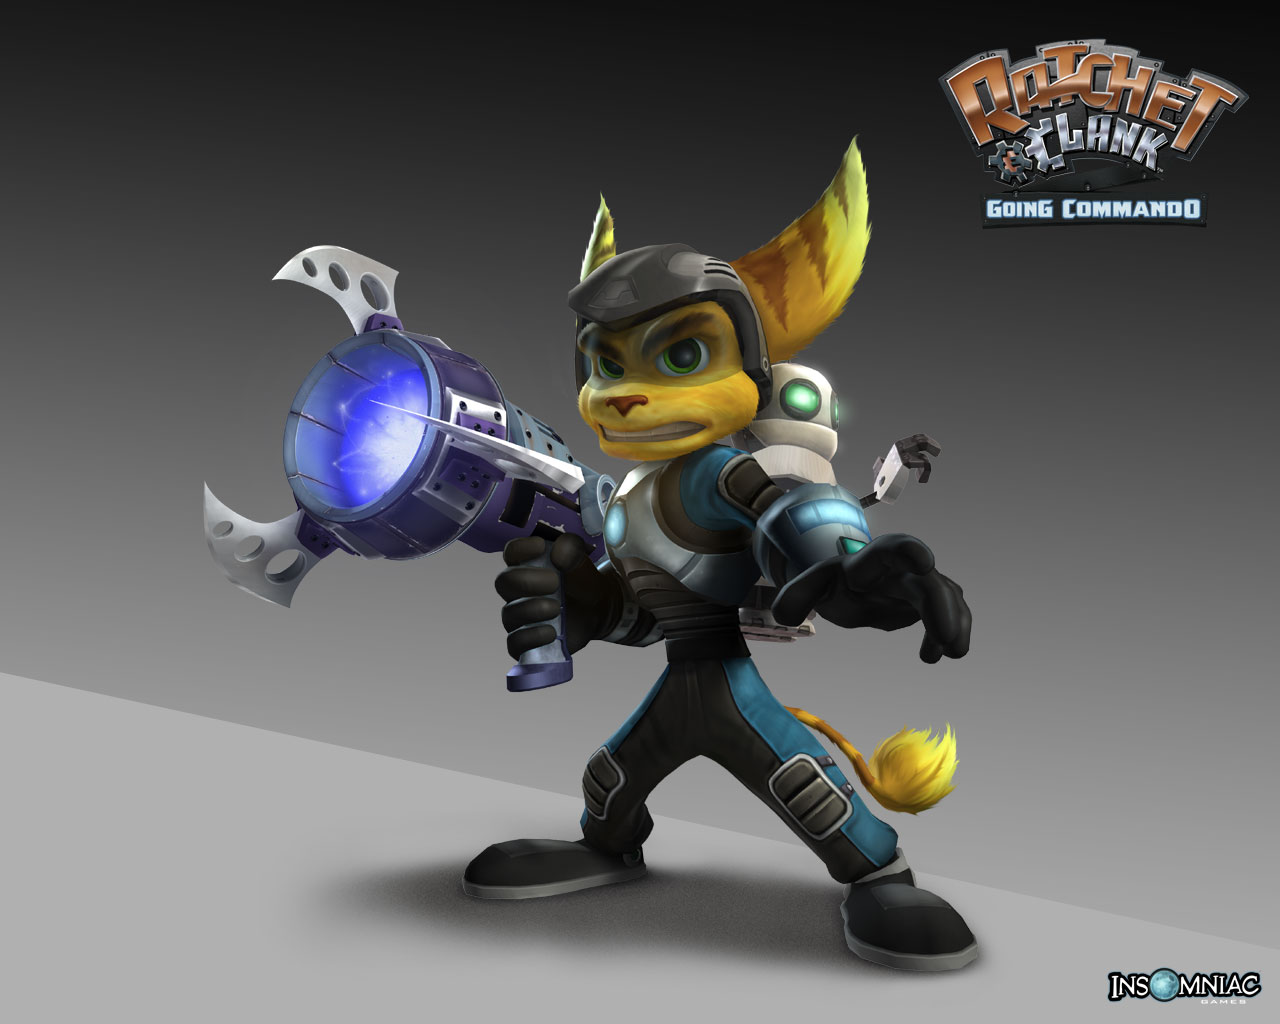 ratchet and clank 2 ps2